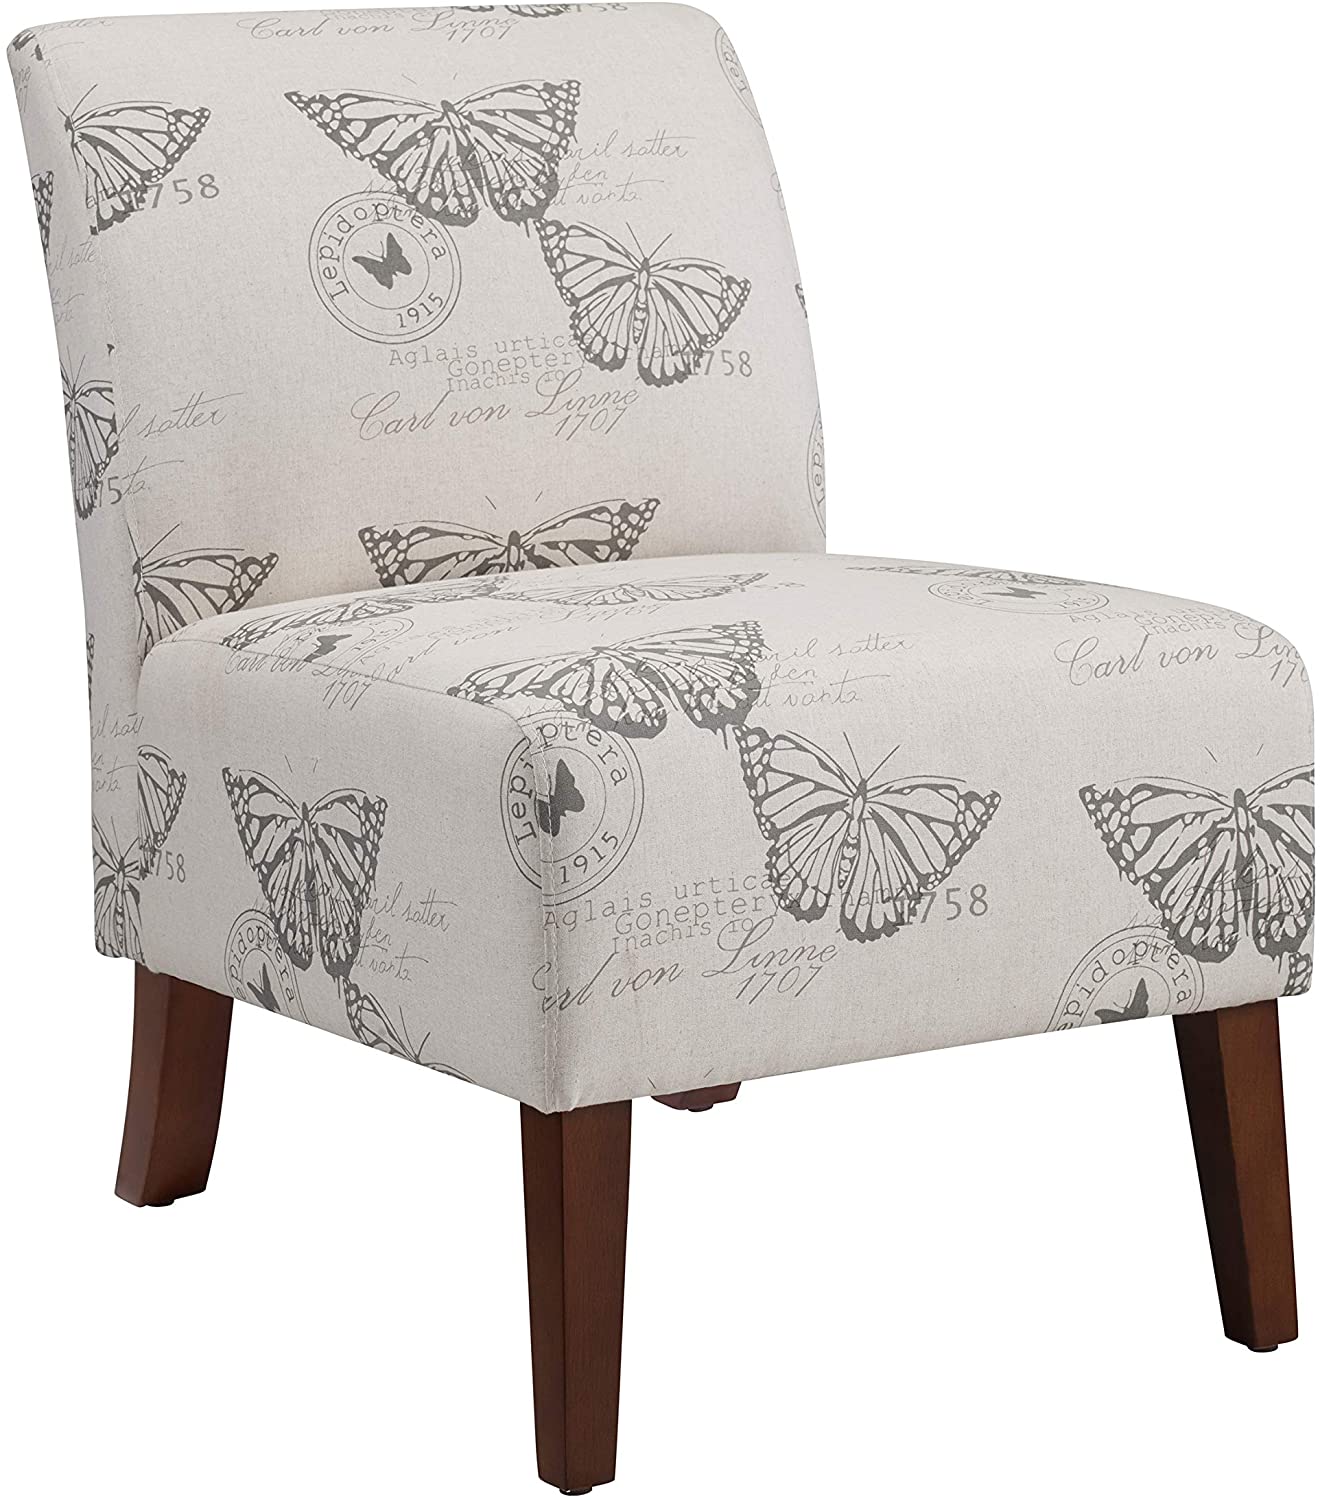 Linon Armless Butterfly Accent Chair